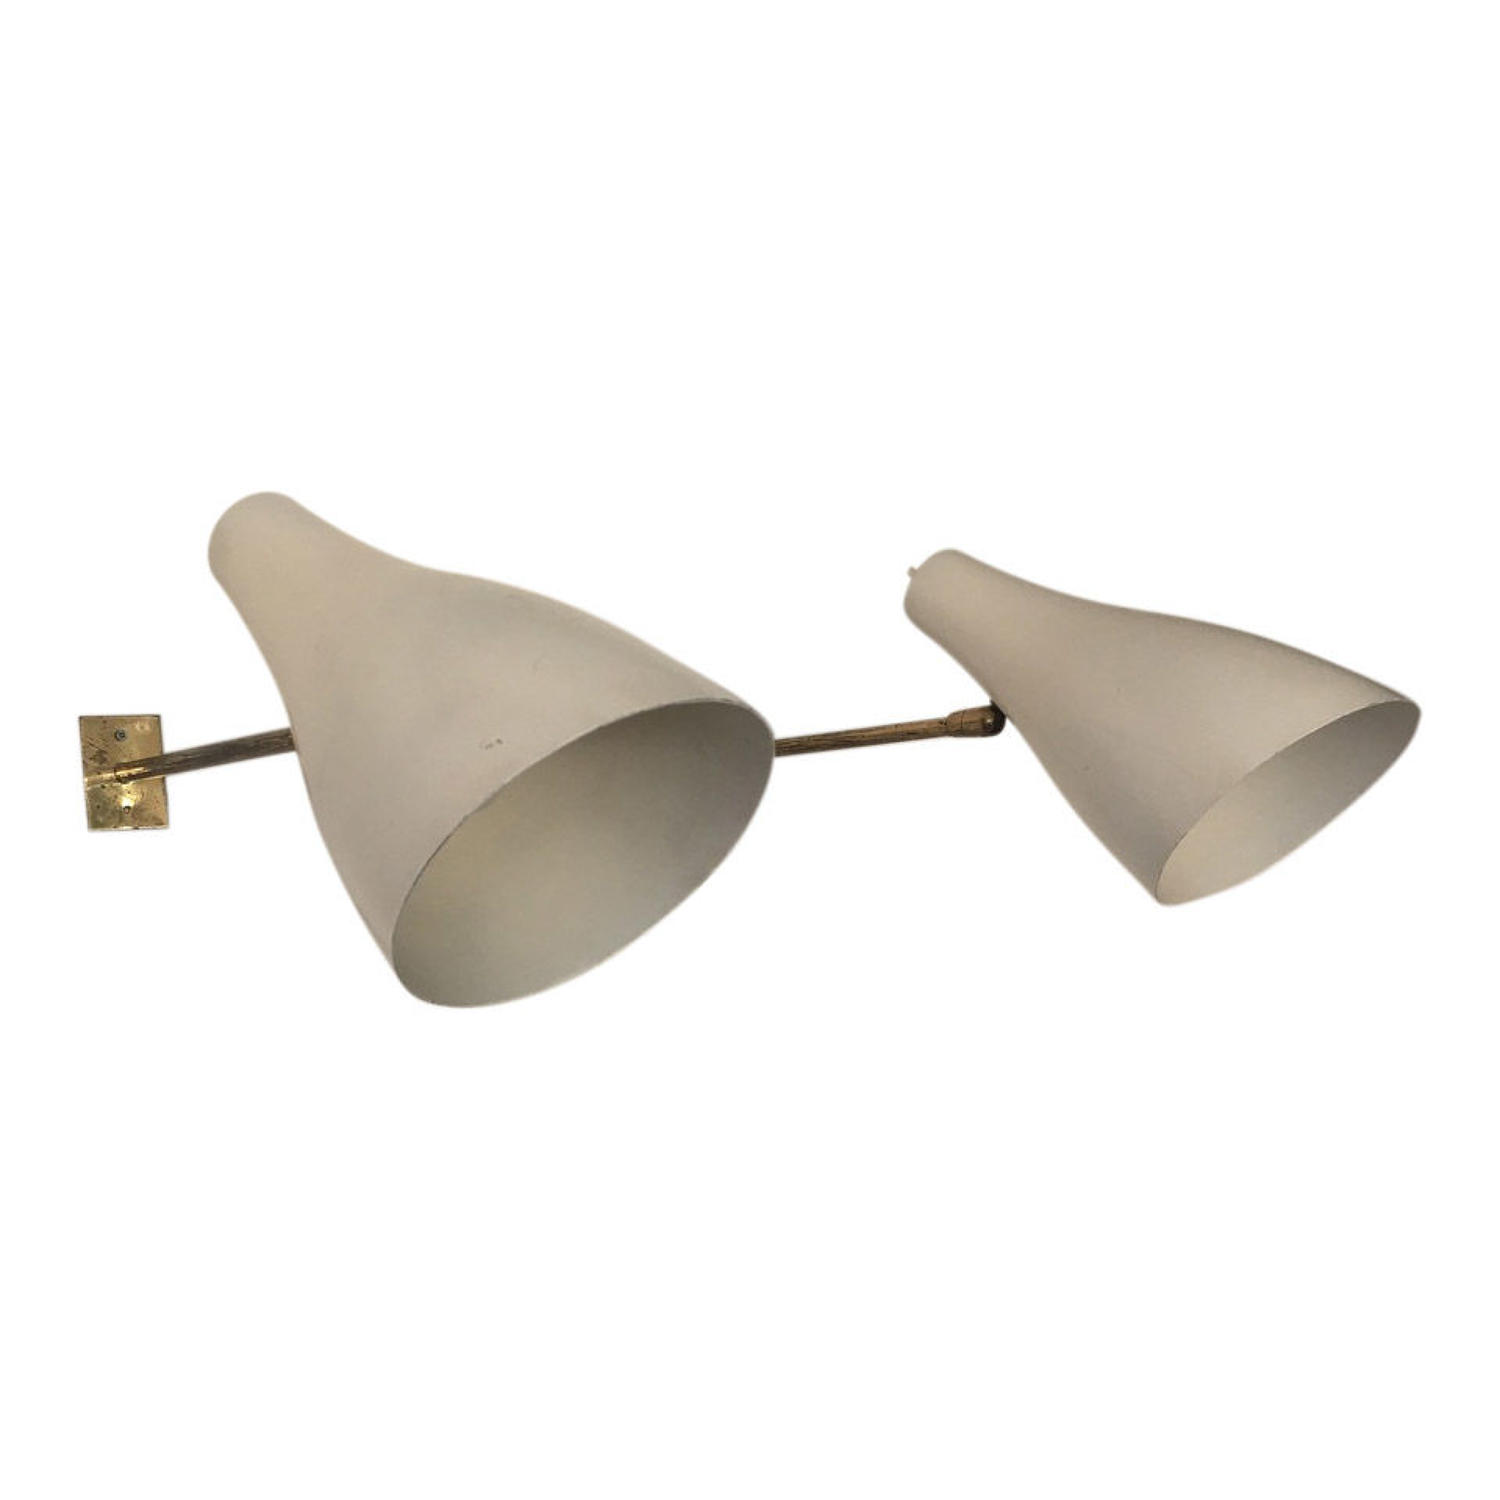 A pair of 1950s Italian brass and enamelled wall lights